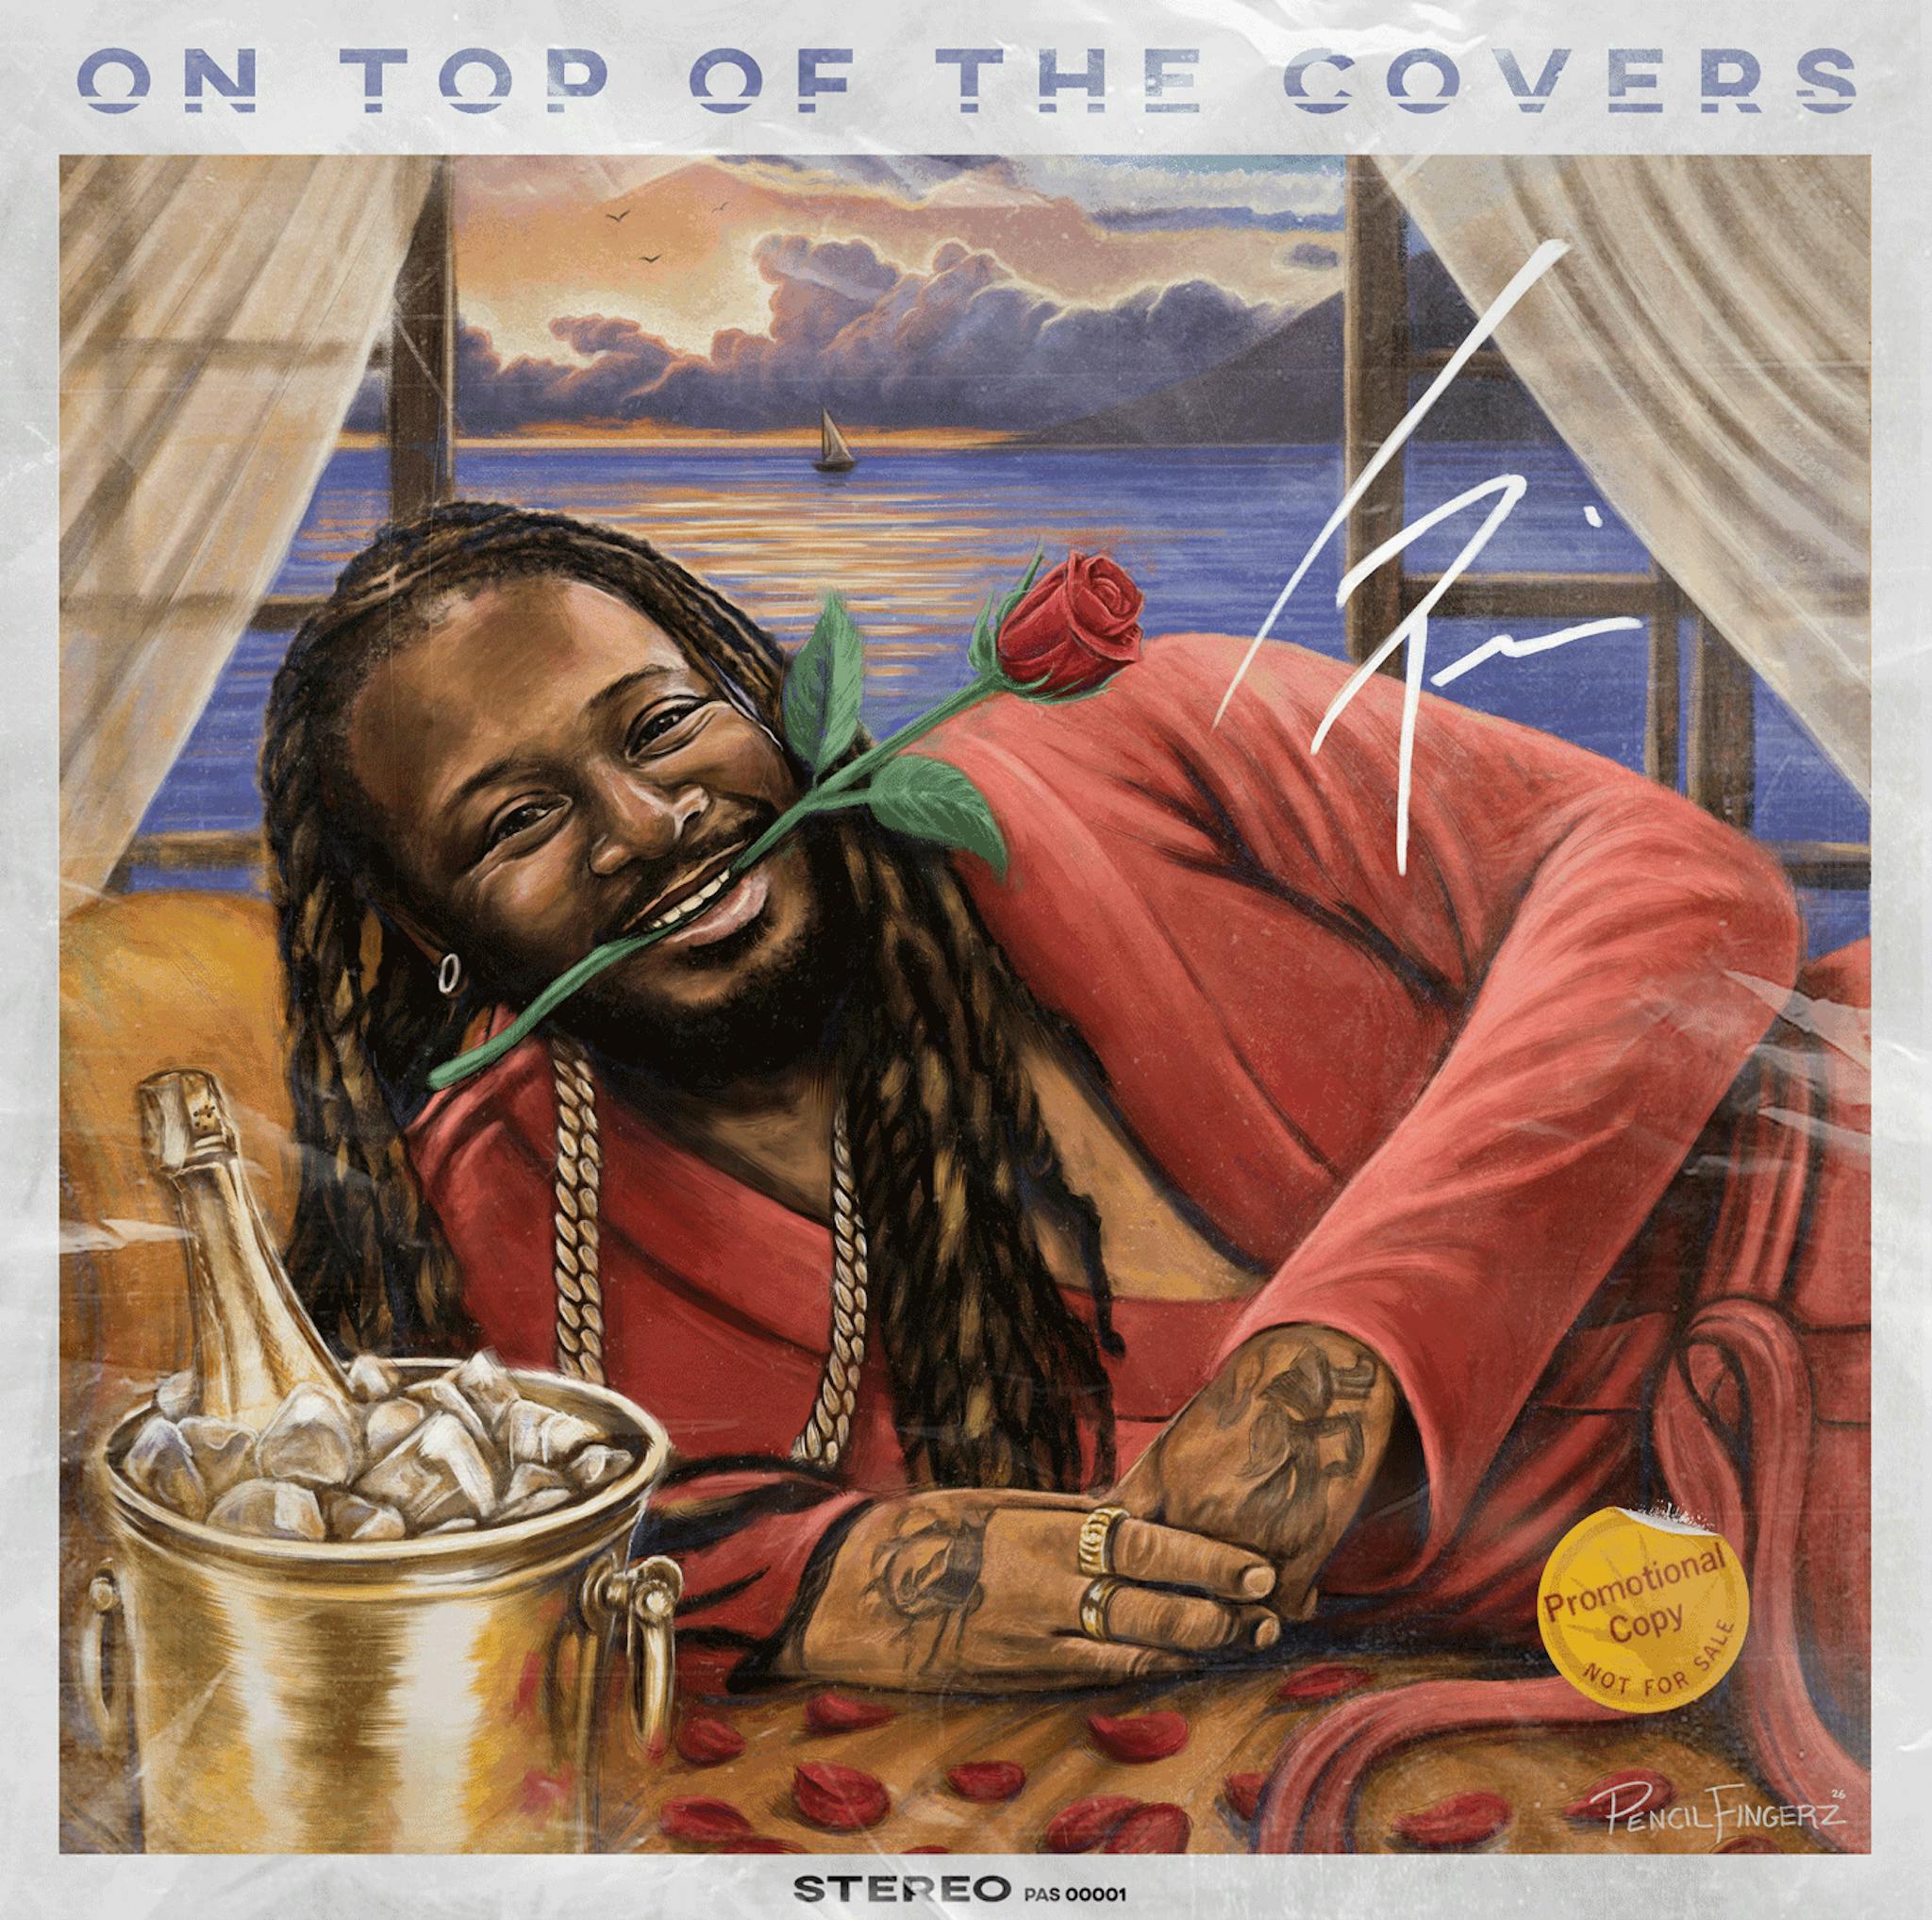 T Pain On Top Of The Covers album artwork